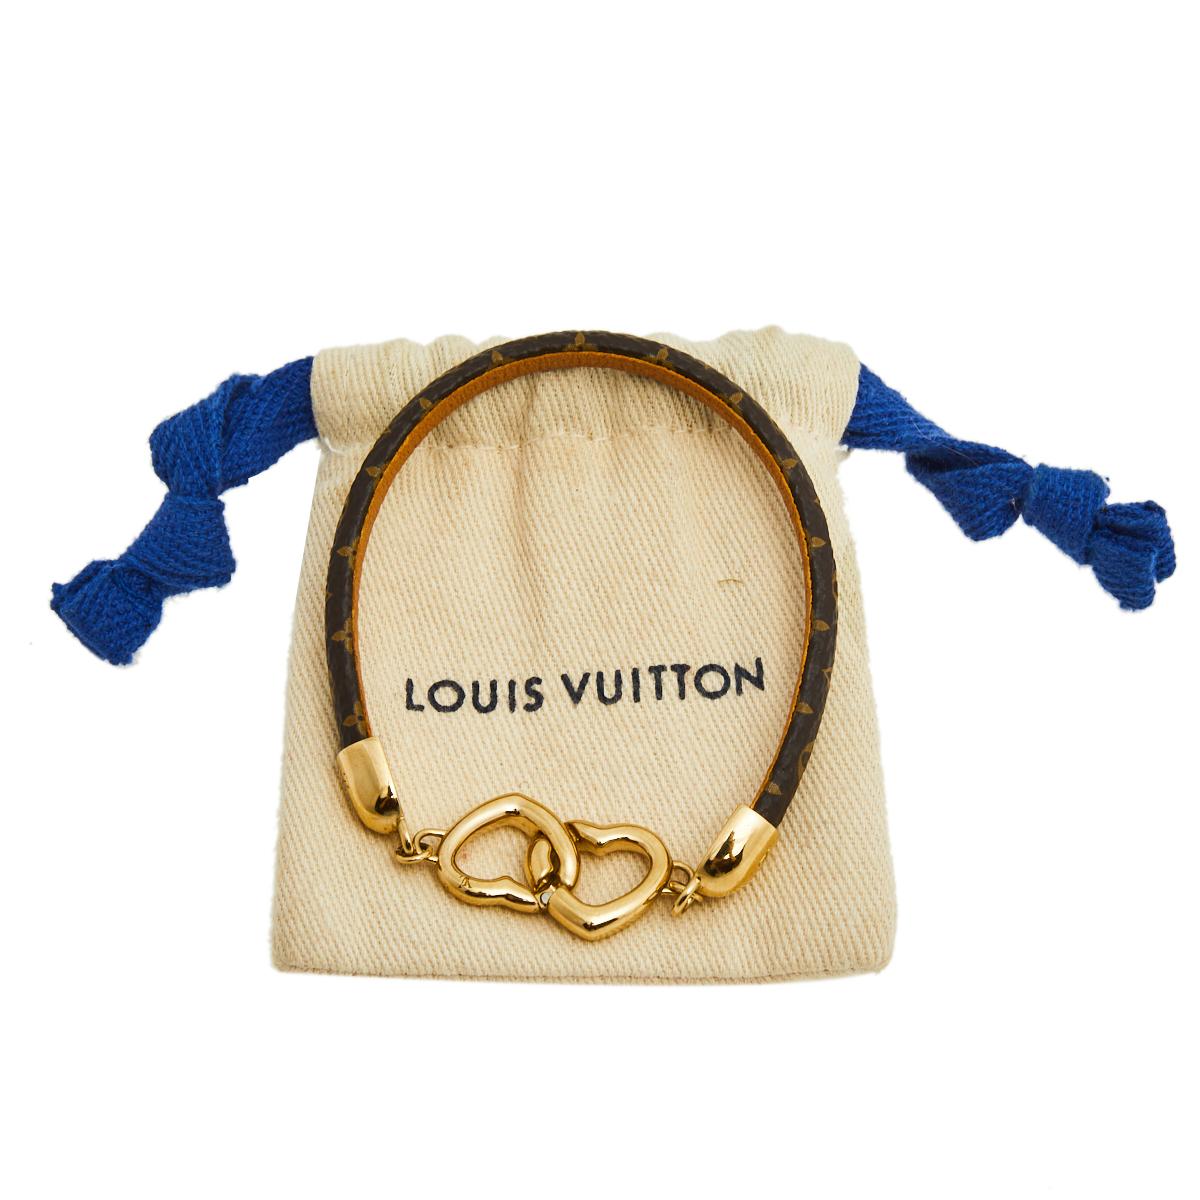 Louis Vuitton Say Yes - For Sale on 1stDibs  louis vuitton say yes bracelet,  lv say yes bracelet, bracelet say yes louis vuitton